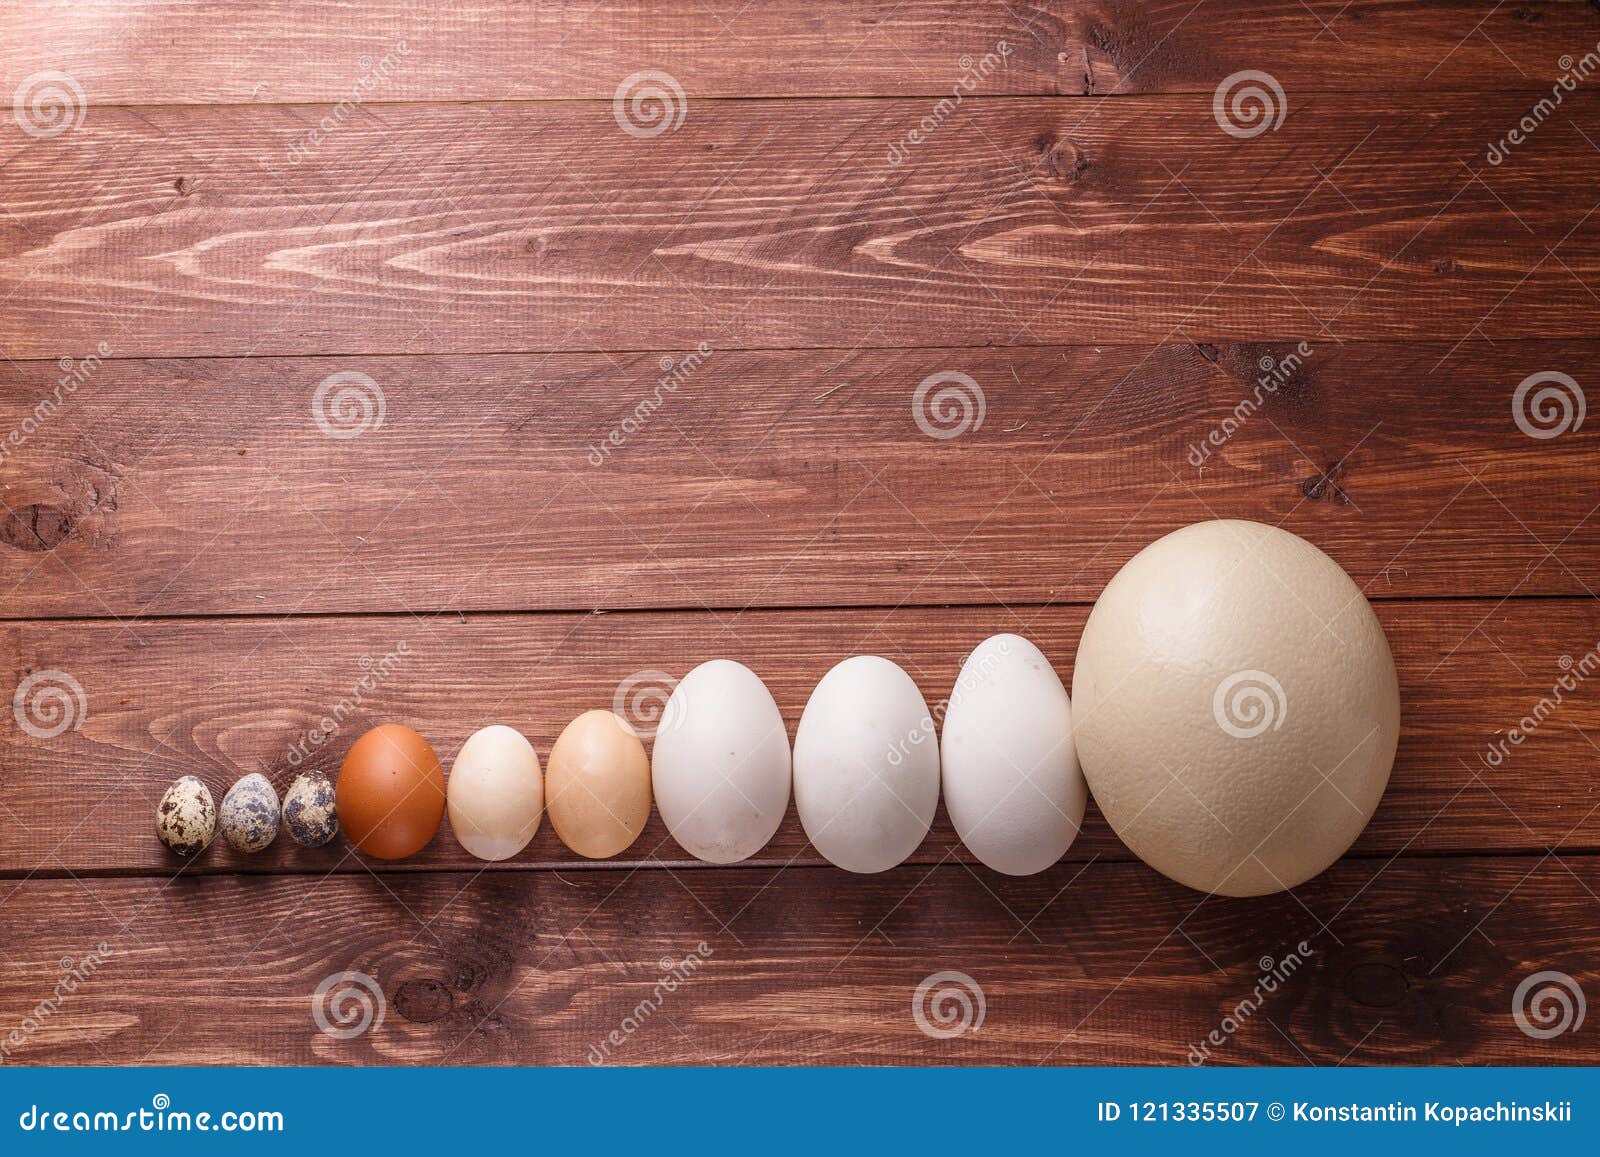 Differet Size Eggs from Different Birds Stock Image - Image of goose,  duckegg: 121335507